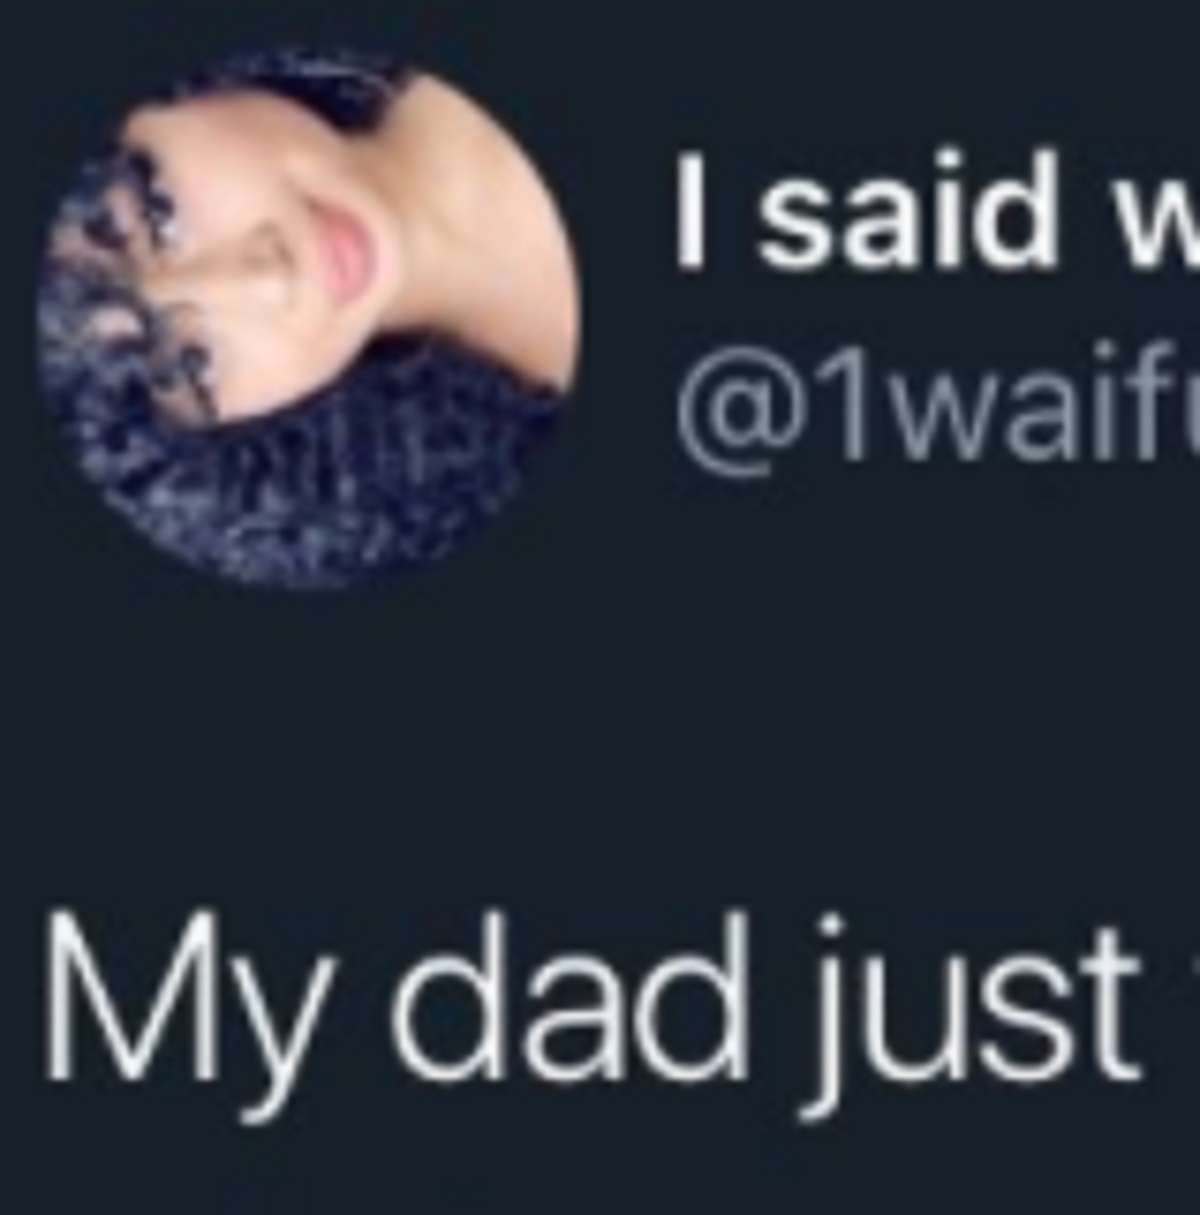 Father Sends Daughter Money by Tipping Her NSFW OnlyFans Account, and She Brags About it On Twitter